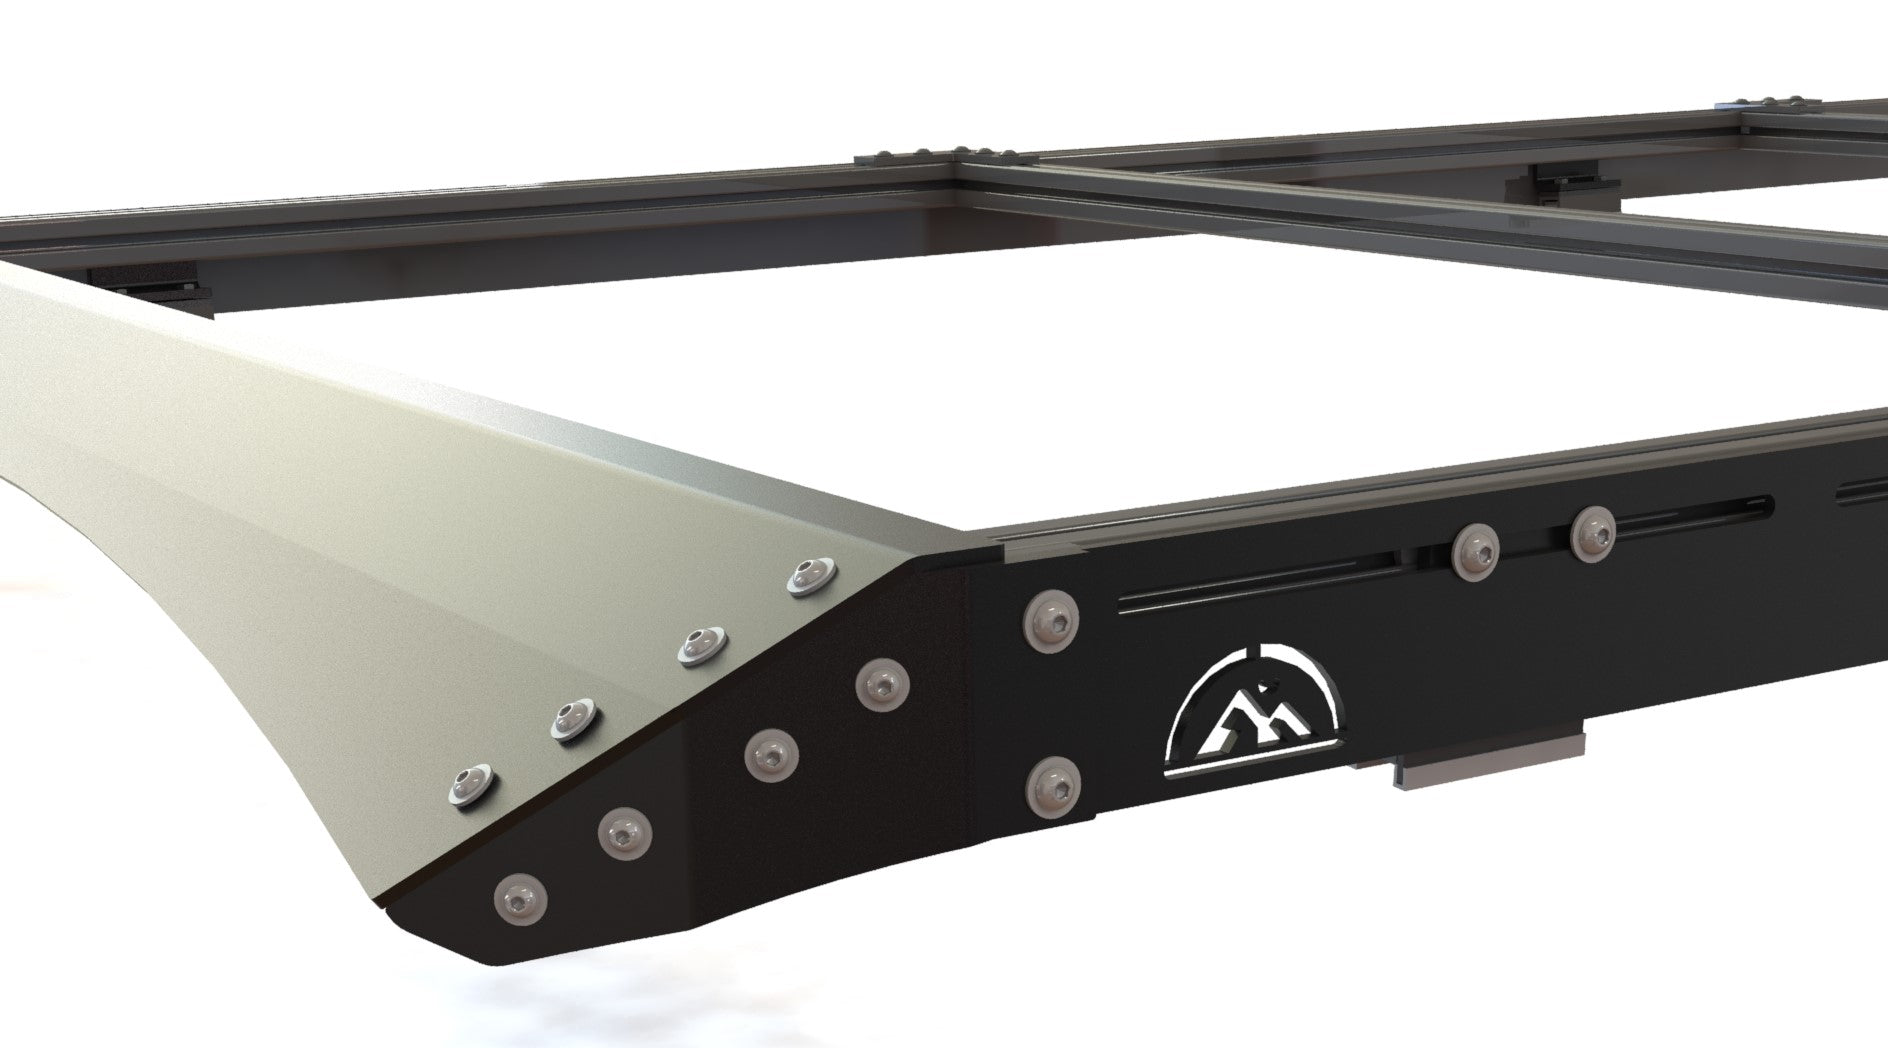 Ram Promaster Roof Rack - HSLD - 159EXT High Roof